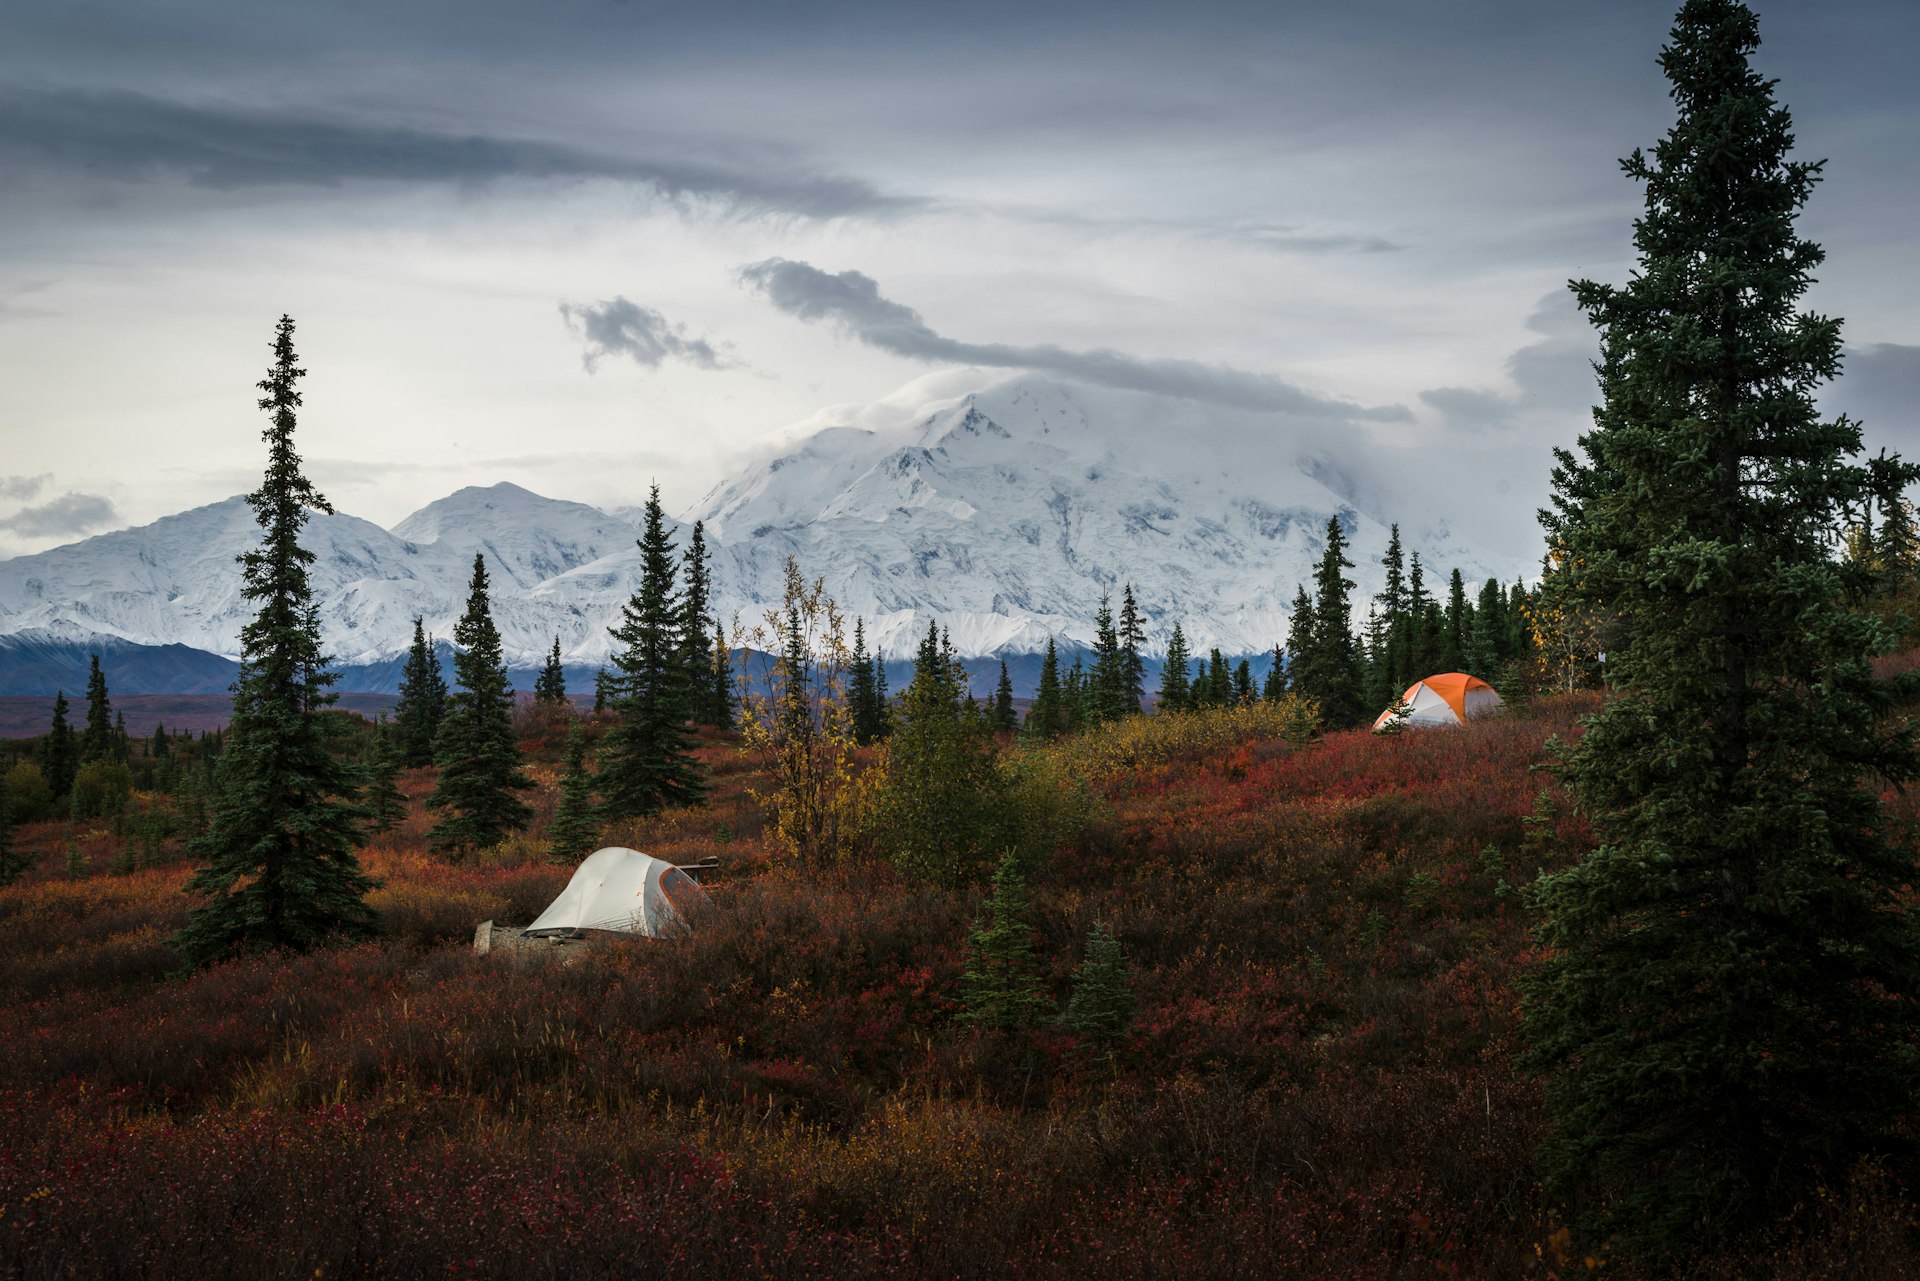 Camping in the Wonder Lake campground, with a view of Mount. Denali